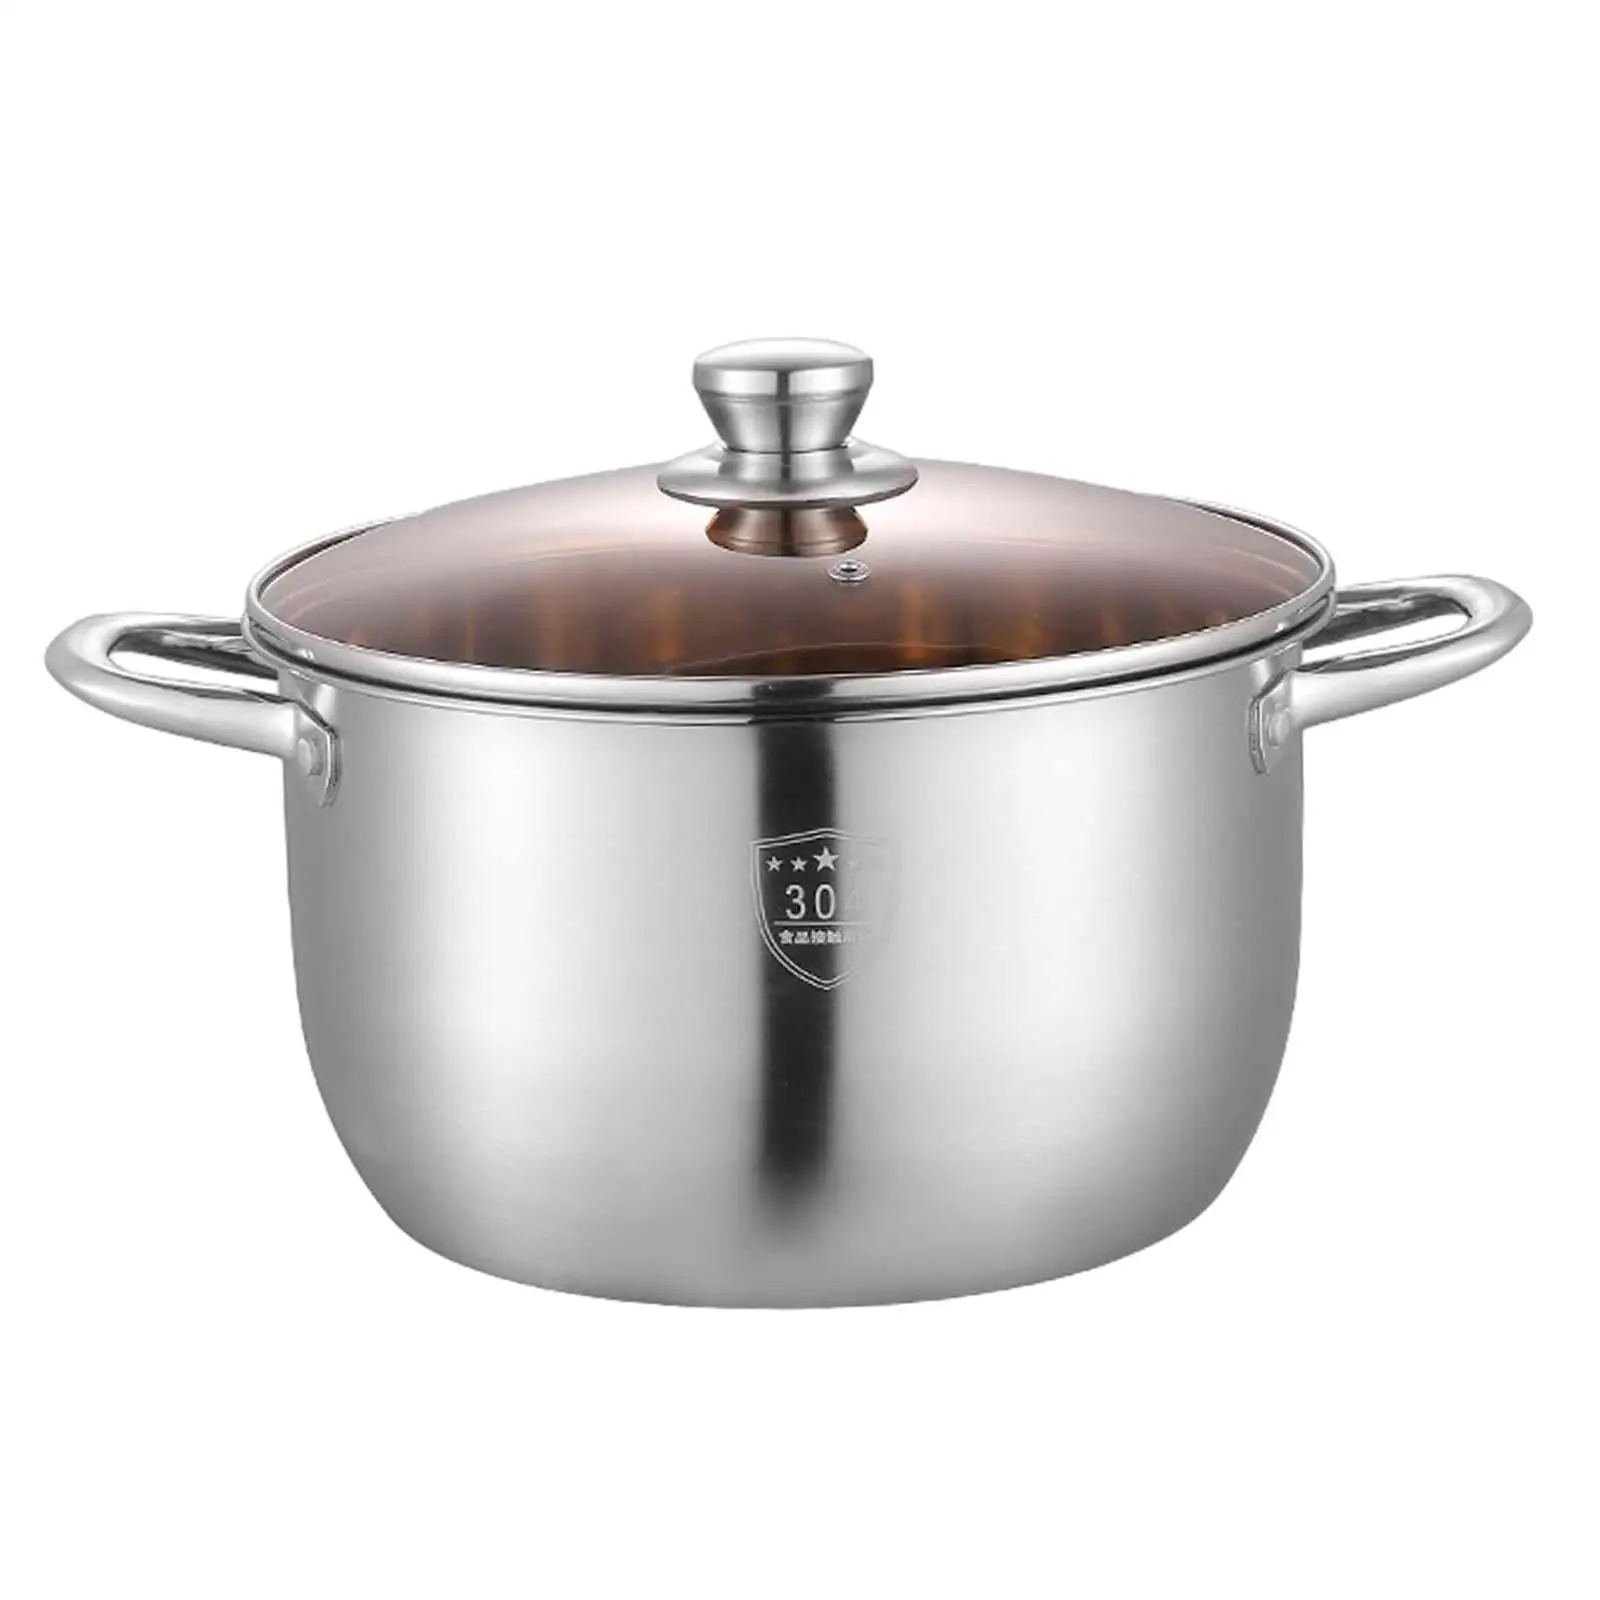 Stainless Steel Stockpot Perfect Size Comfortable Grip Cookware Non Stick Soup Pot for Eggs Soup Warming Milk Sauce Noodles